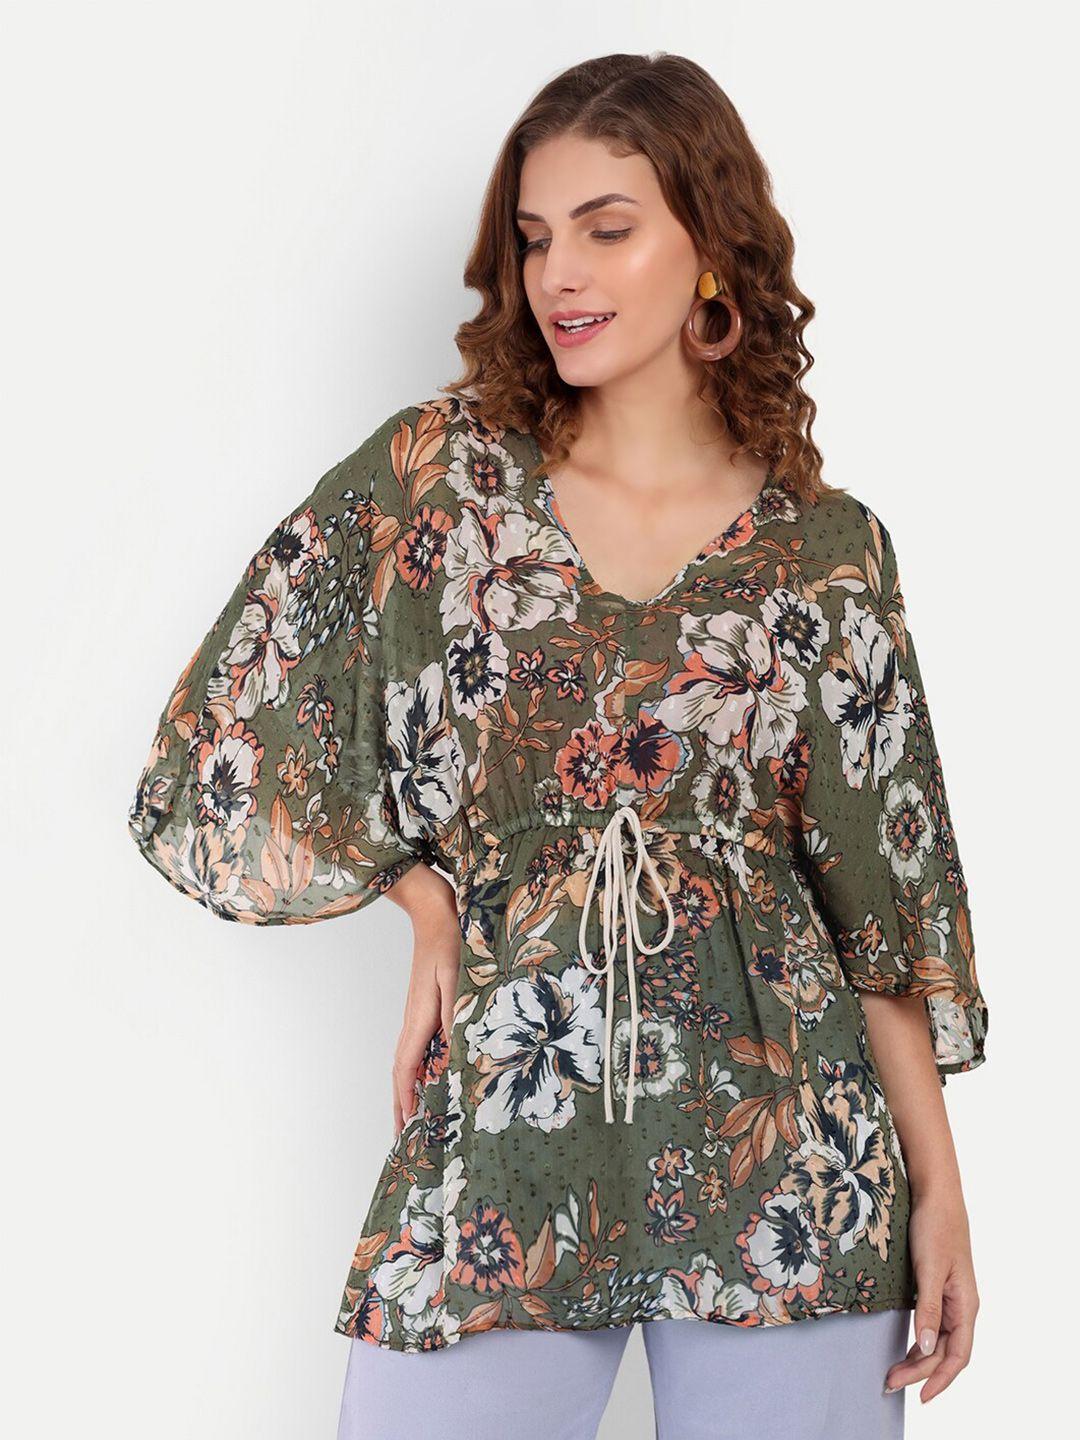 rediscover fashion floral printed flared sleeve georgette top